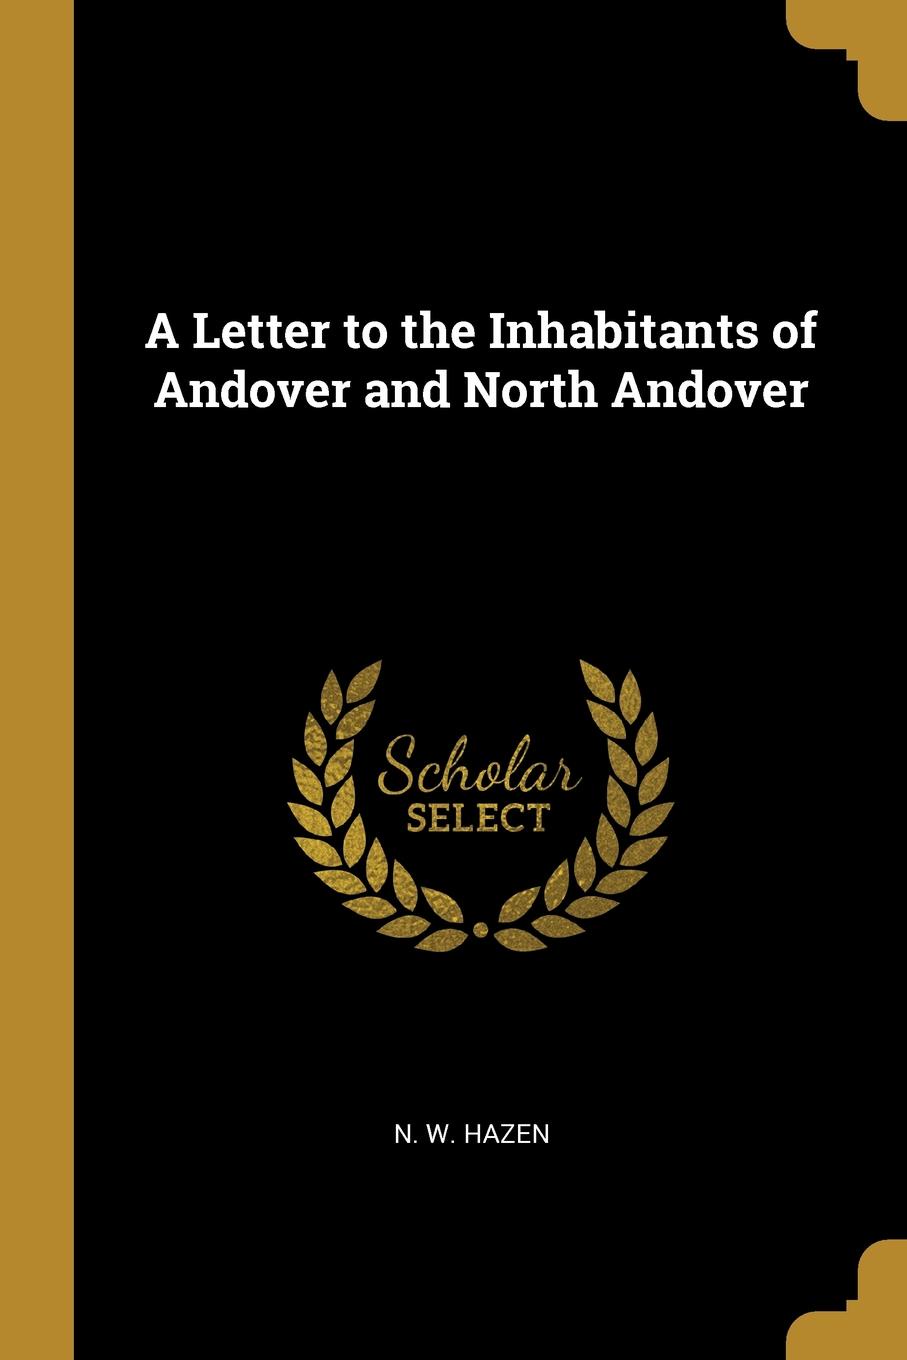 A Letter to the Inhabitants of Andover and North Andover